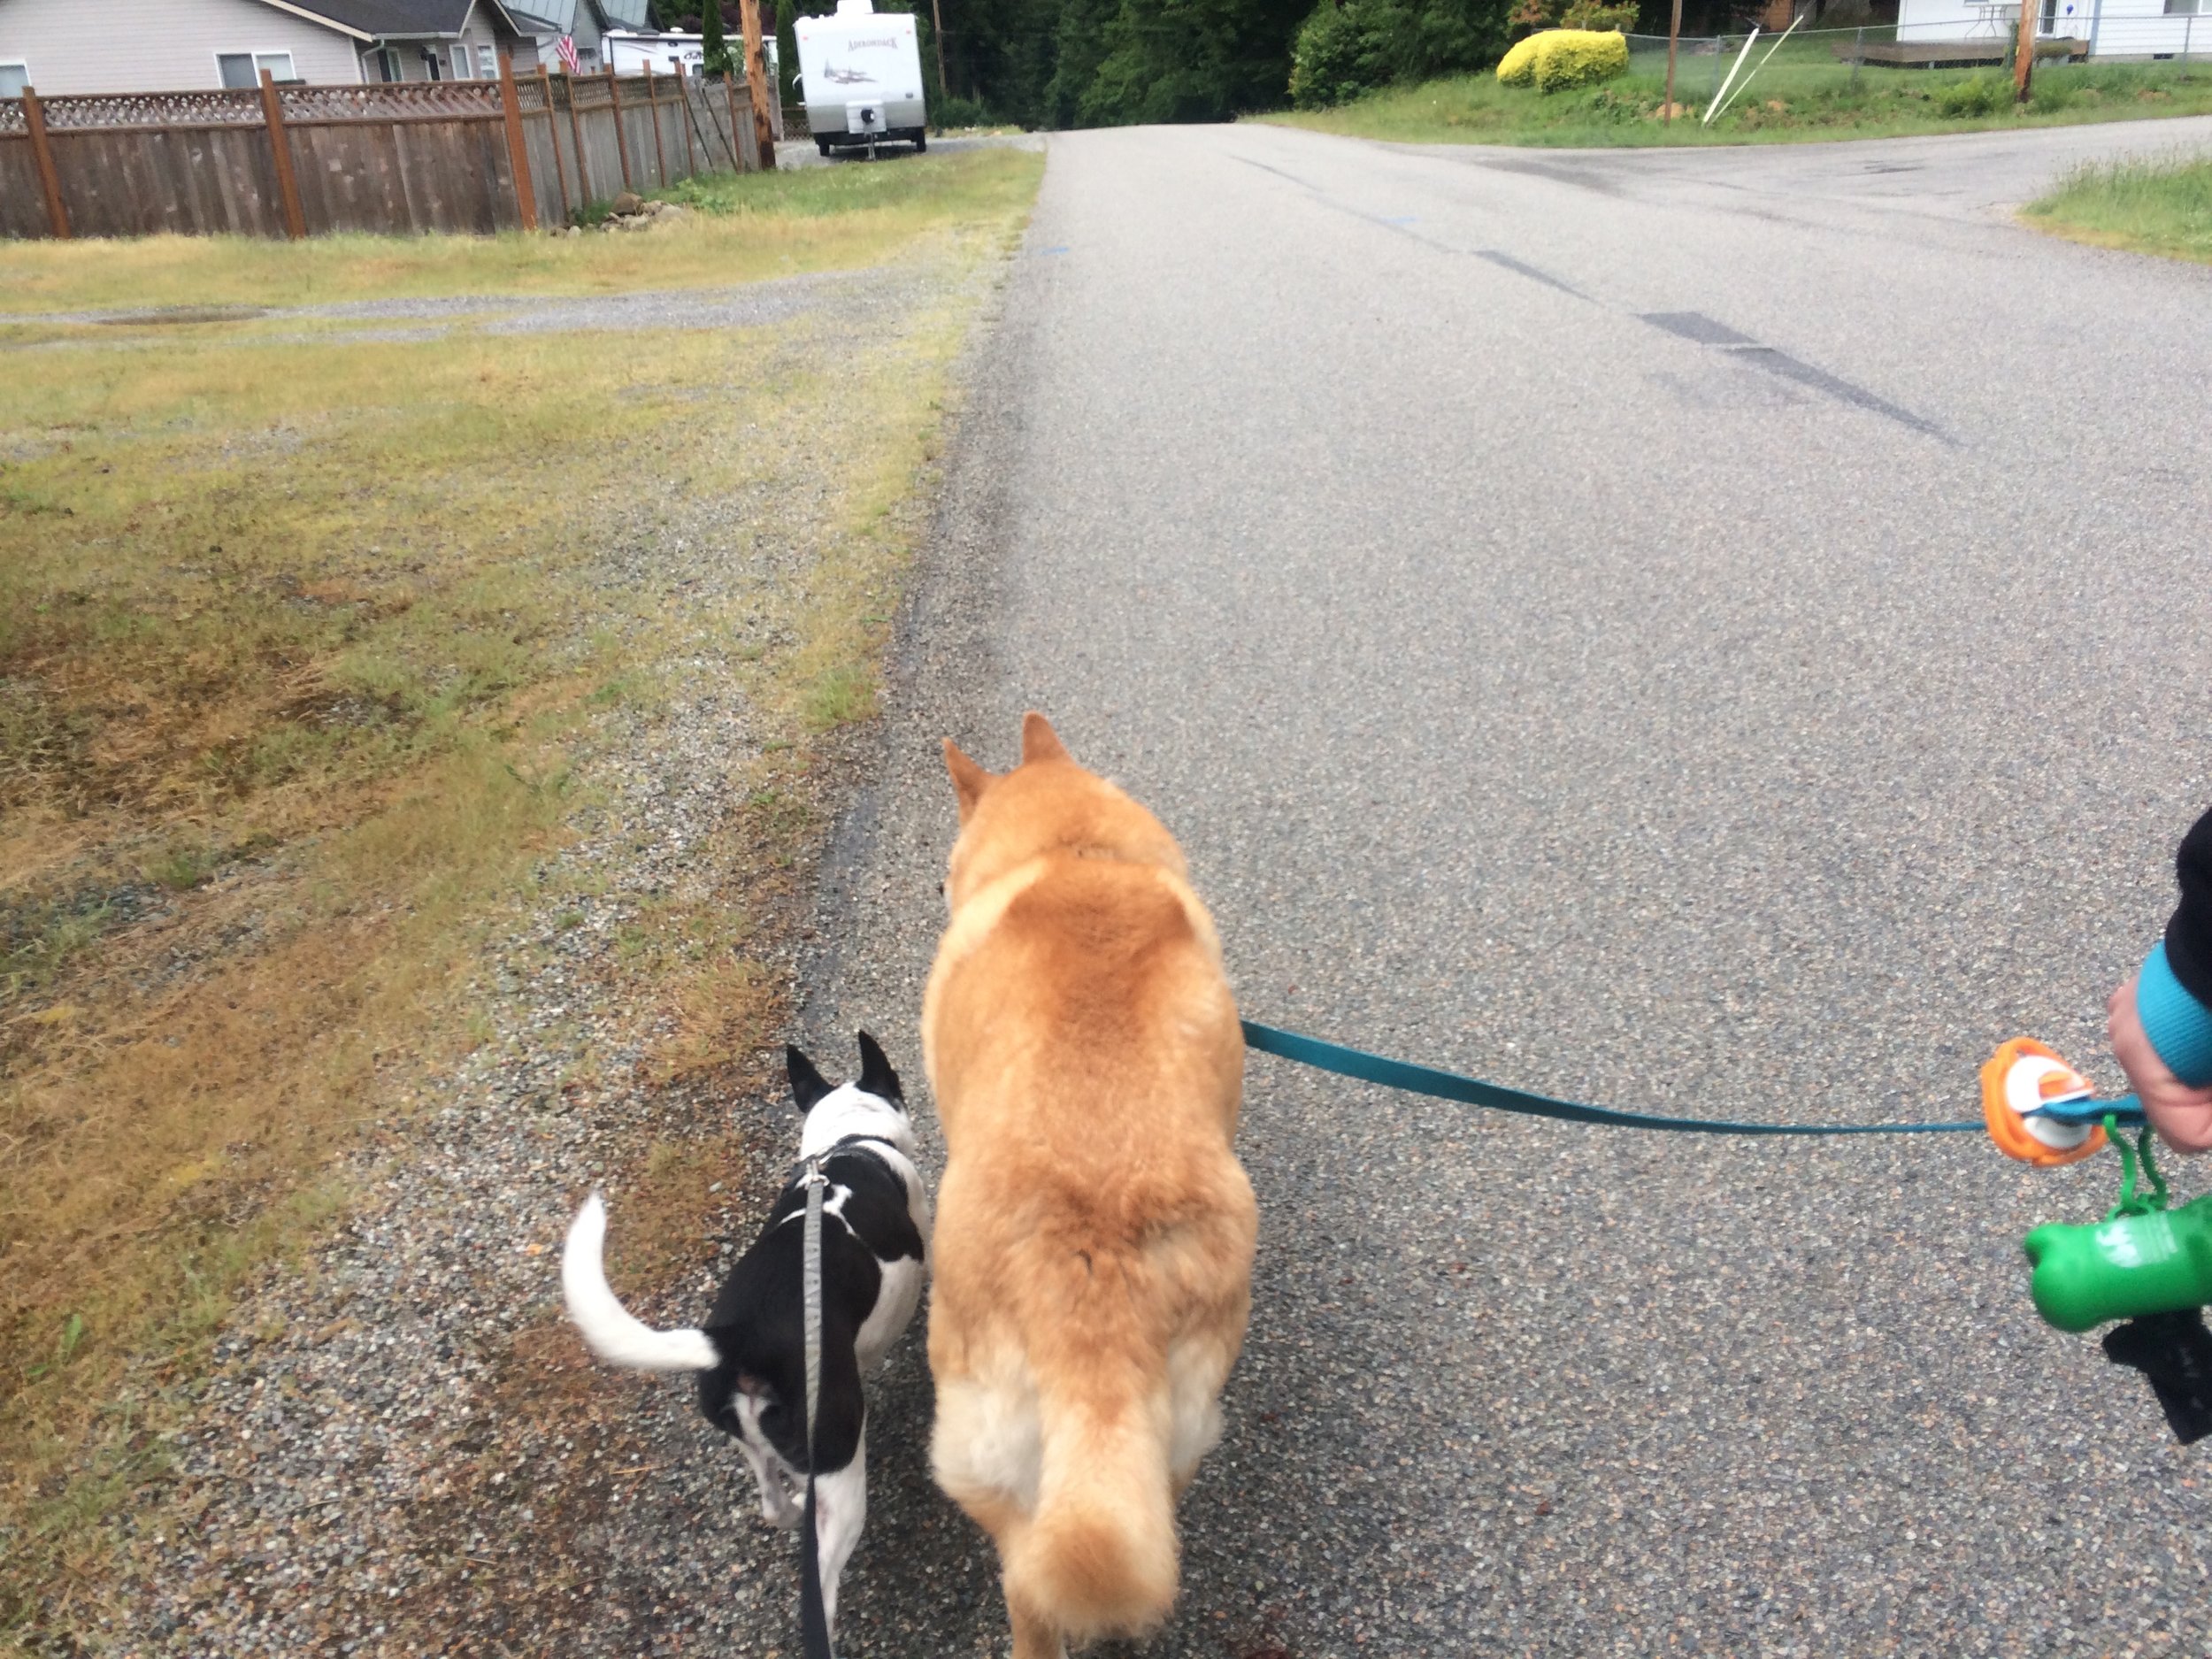 Best friends out for a walk.